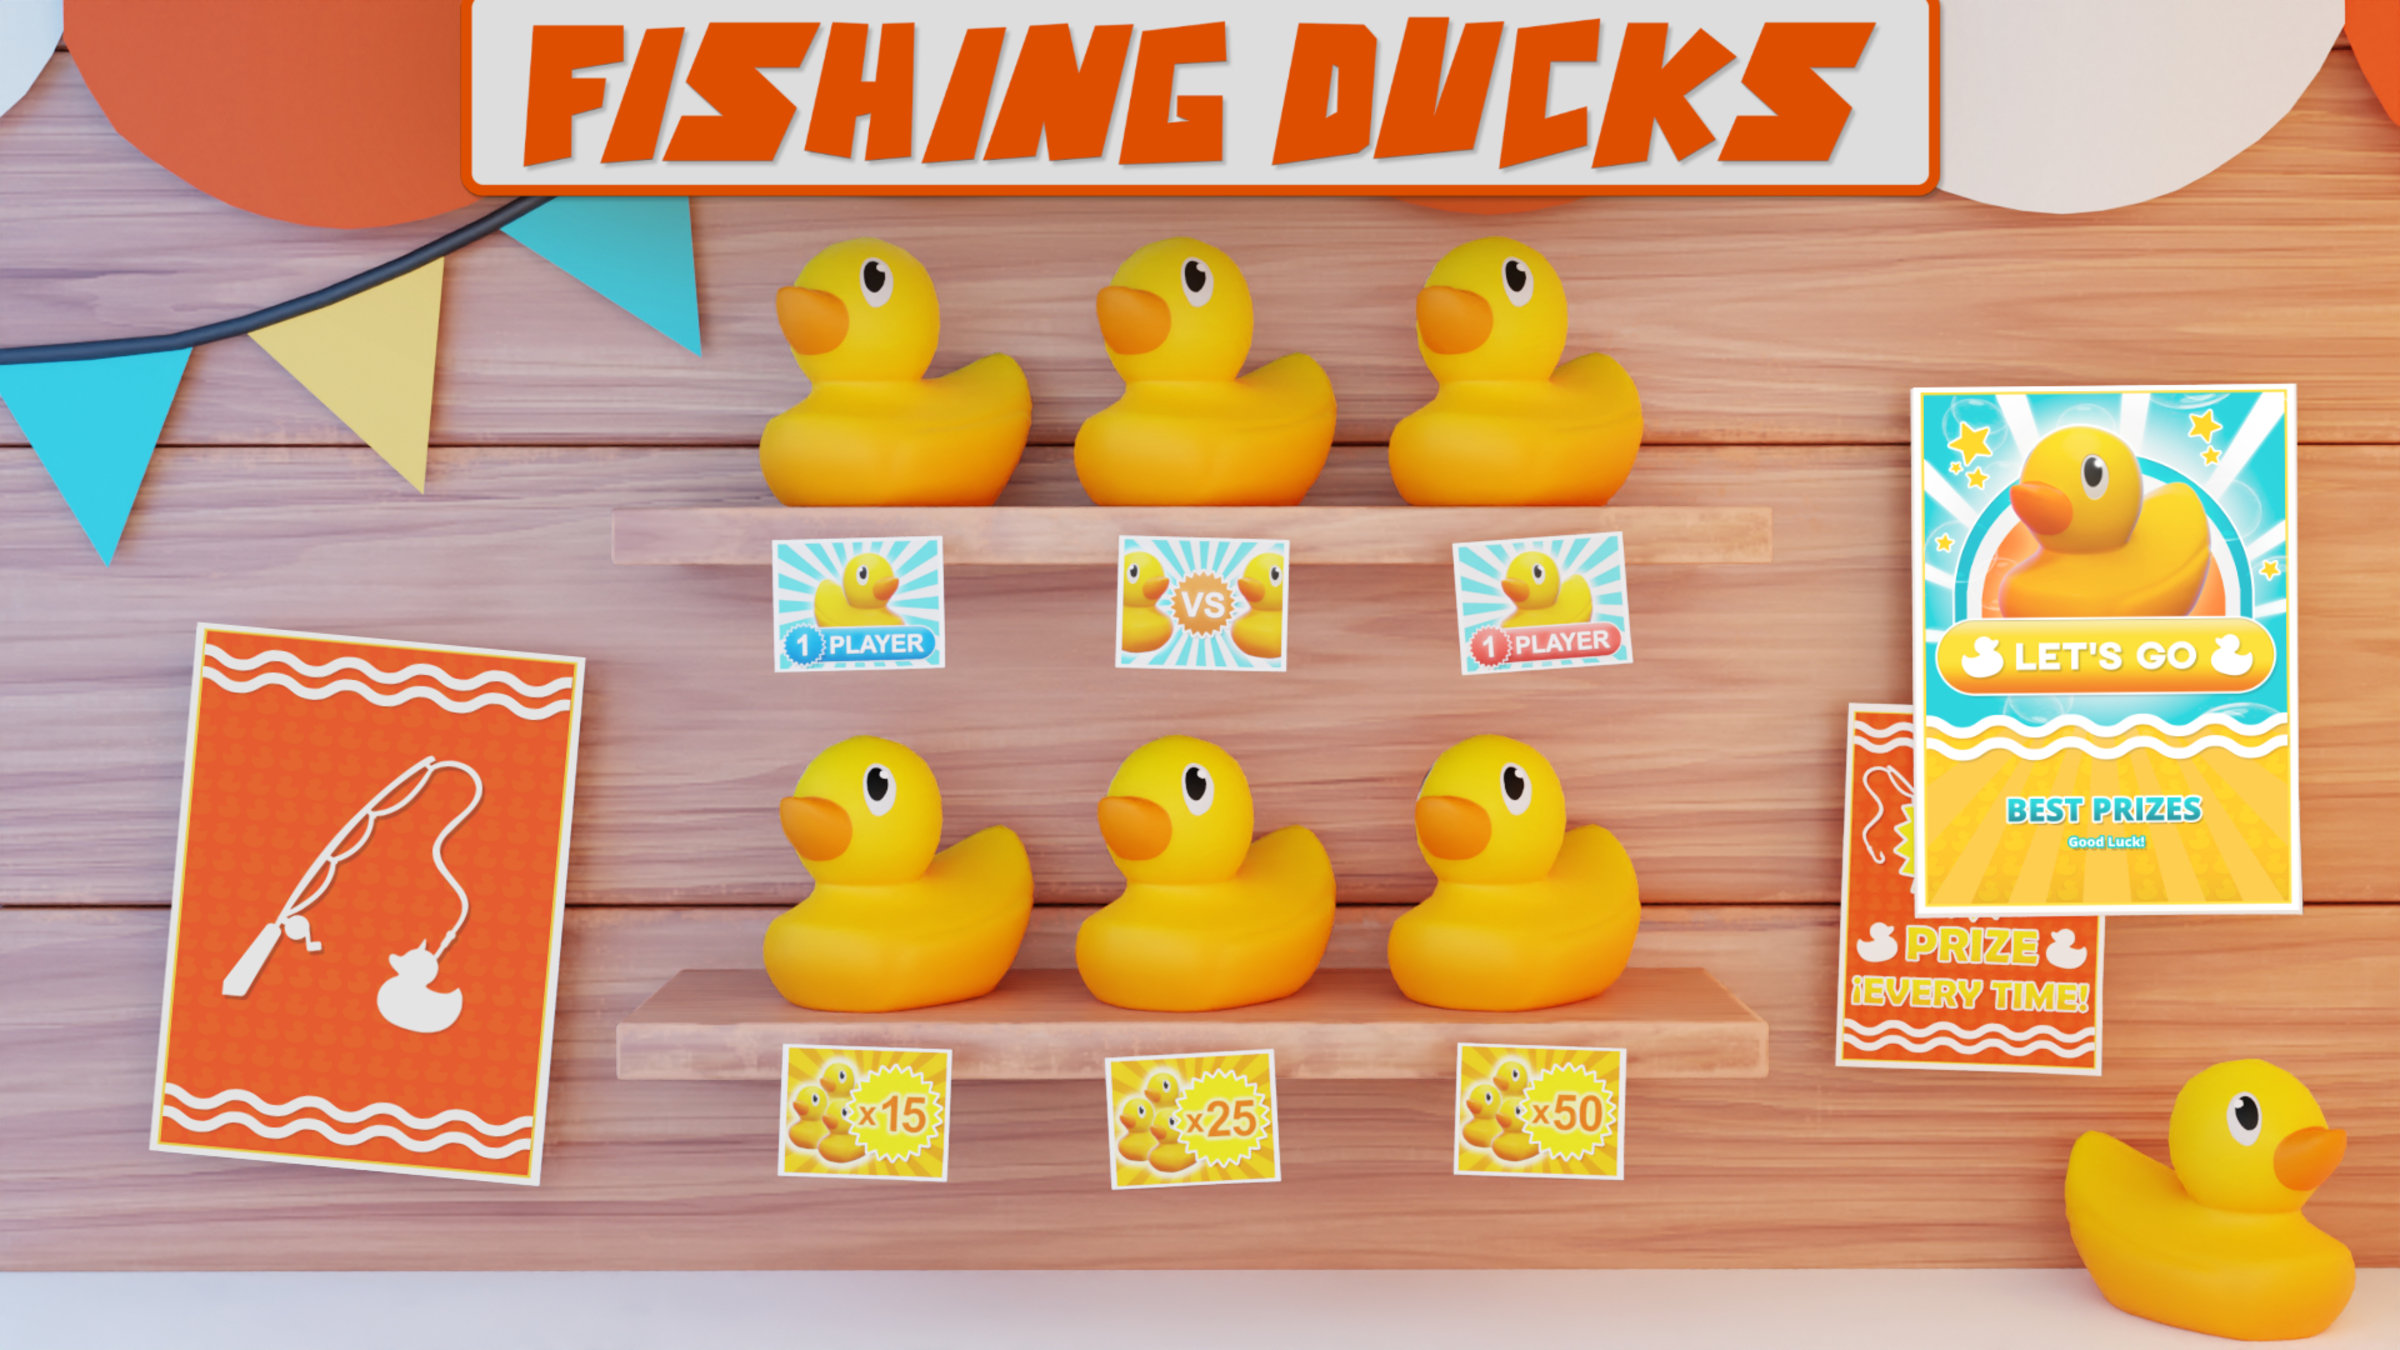 Fishing Ducks for Nintendo Switch - Nintendo Official Site